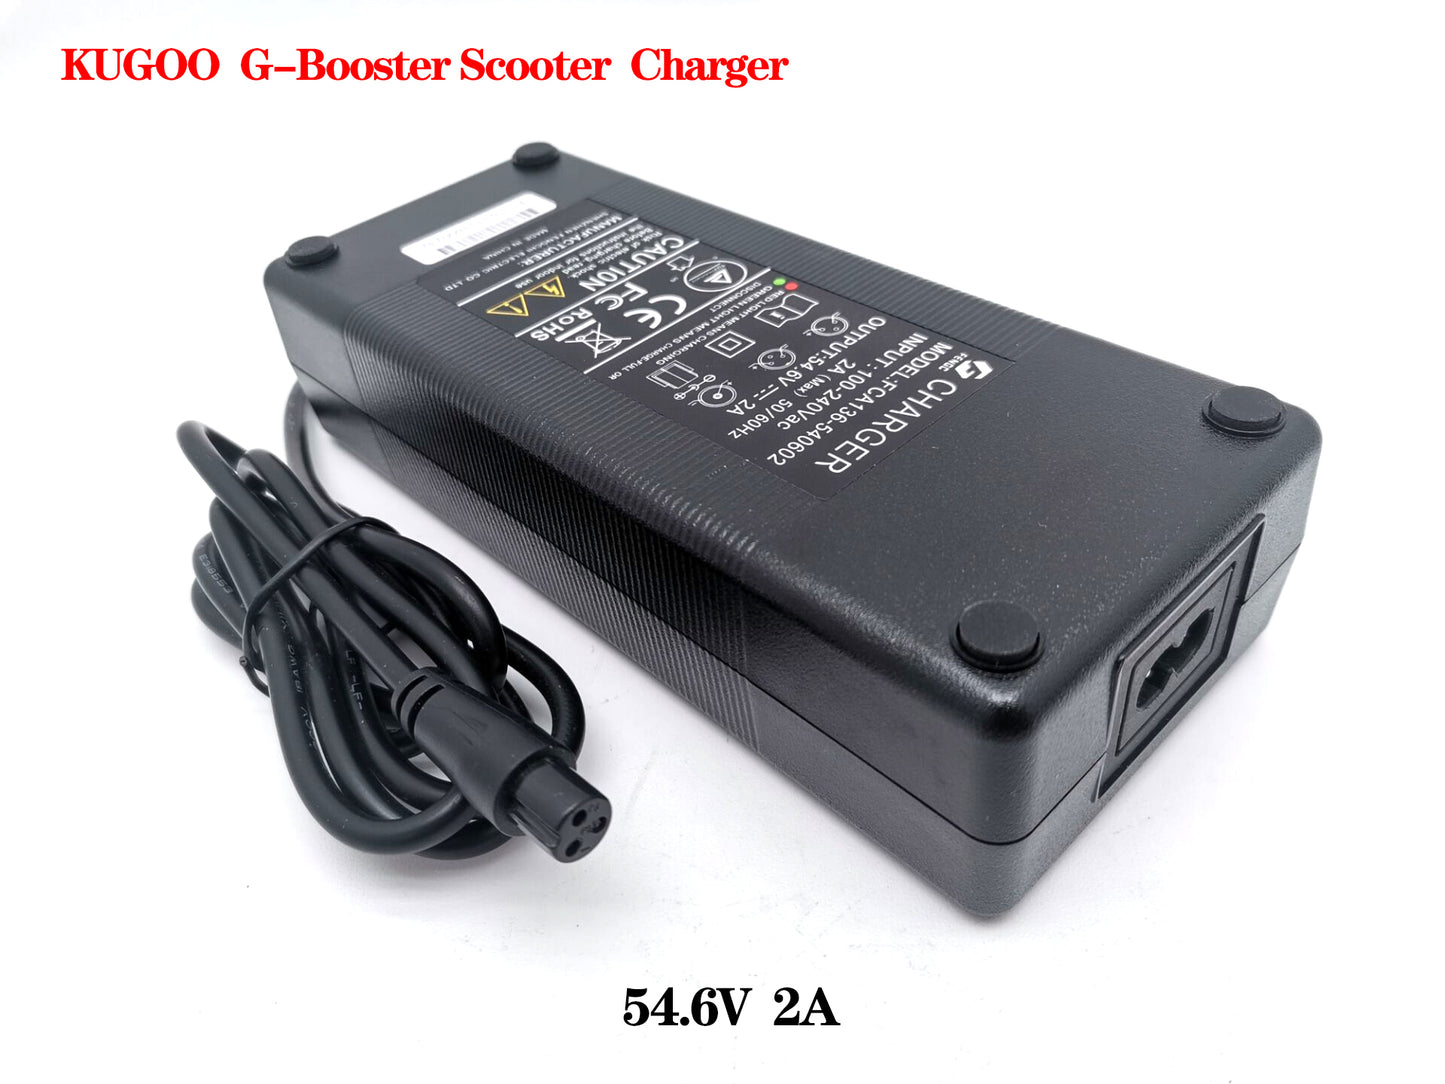 Kugoo Gbooster 3 pin charger